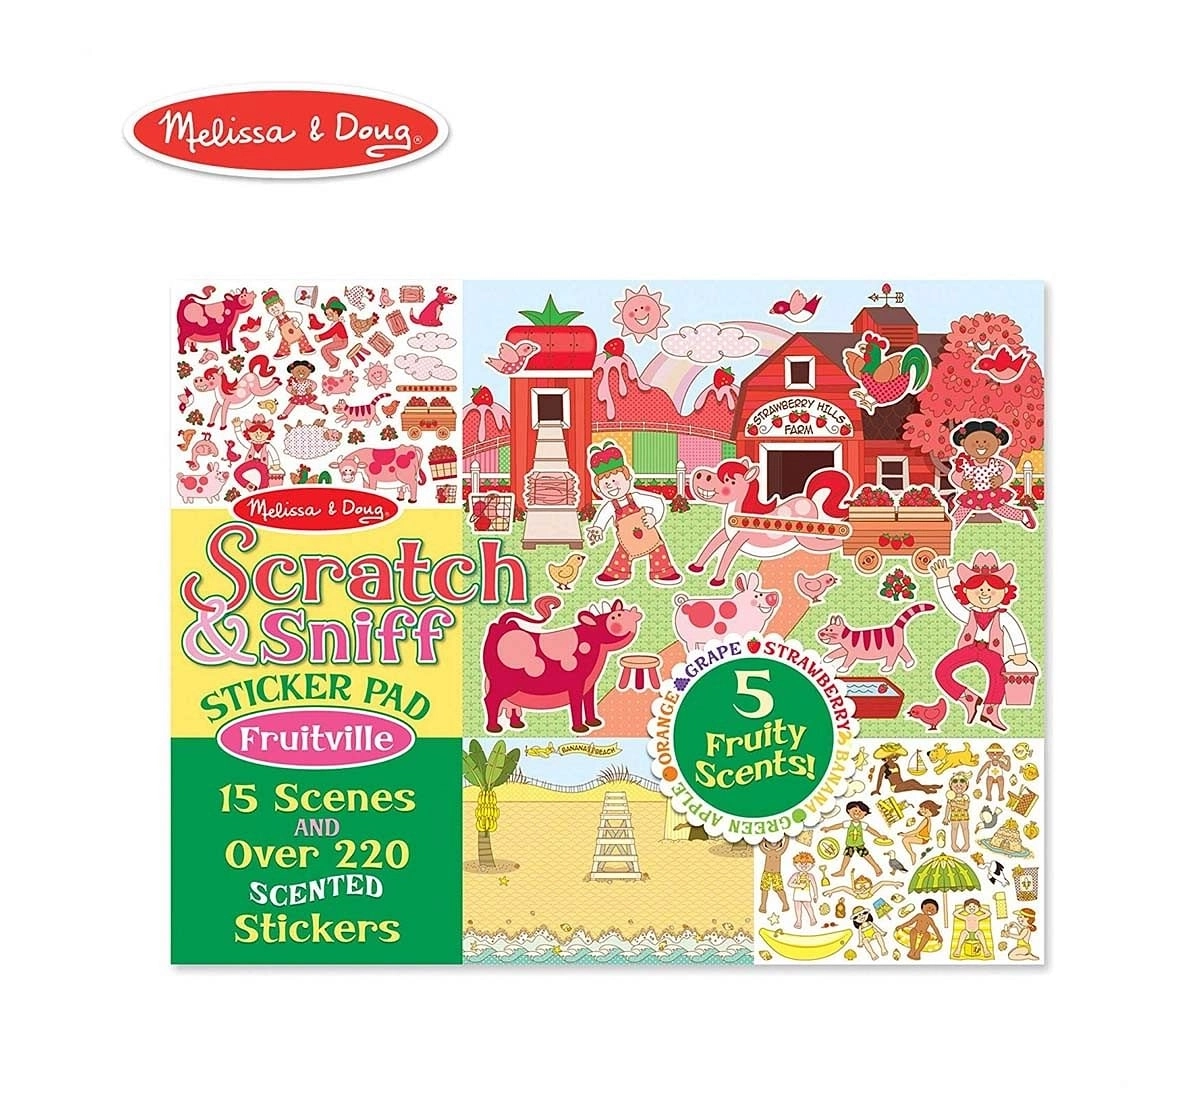 Melissa & Doug Scratch and Sniff Fruitville Sticker Pad Toy, Multi Color DIY Art & Craft Kits for Kids age 3Y+ 